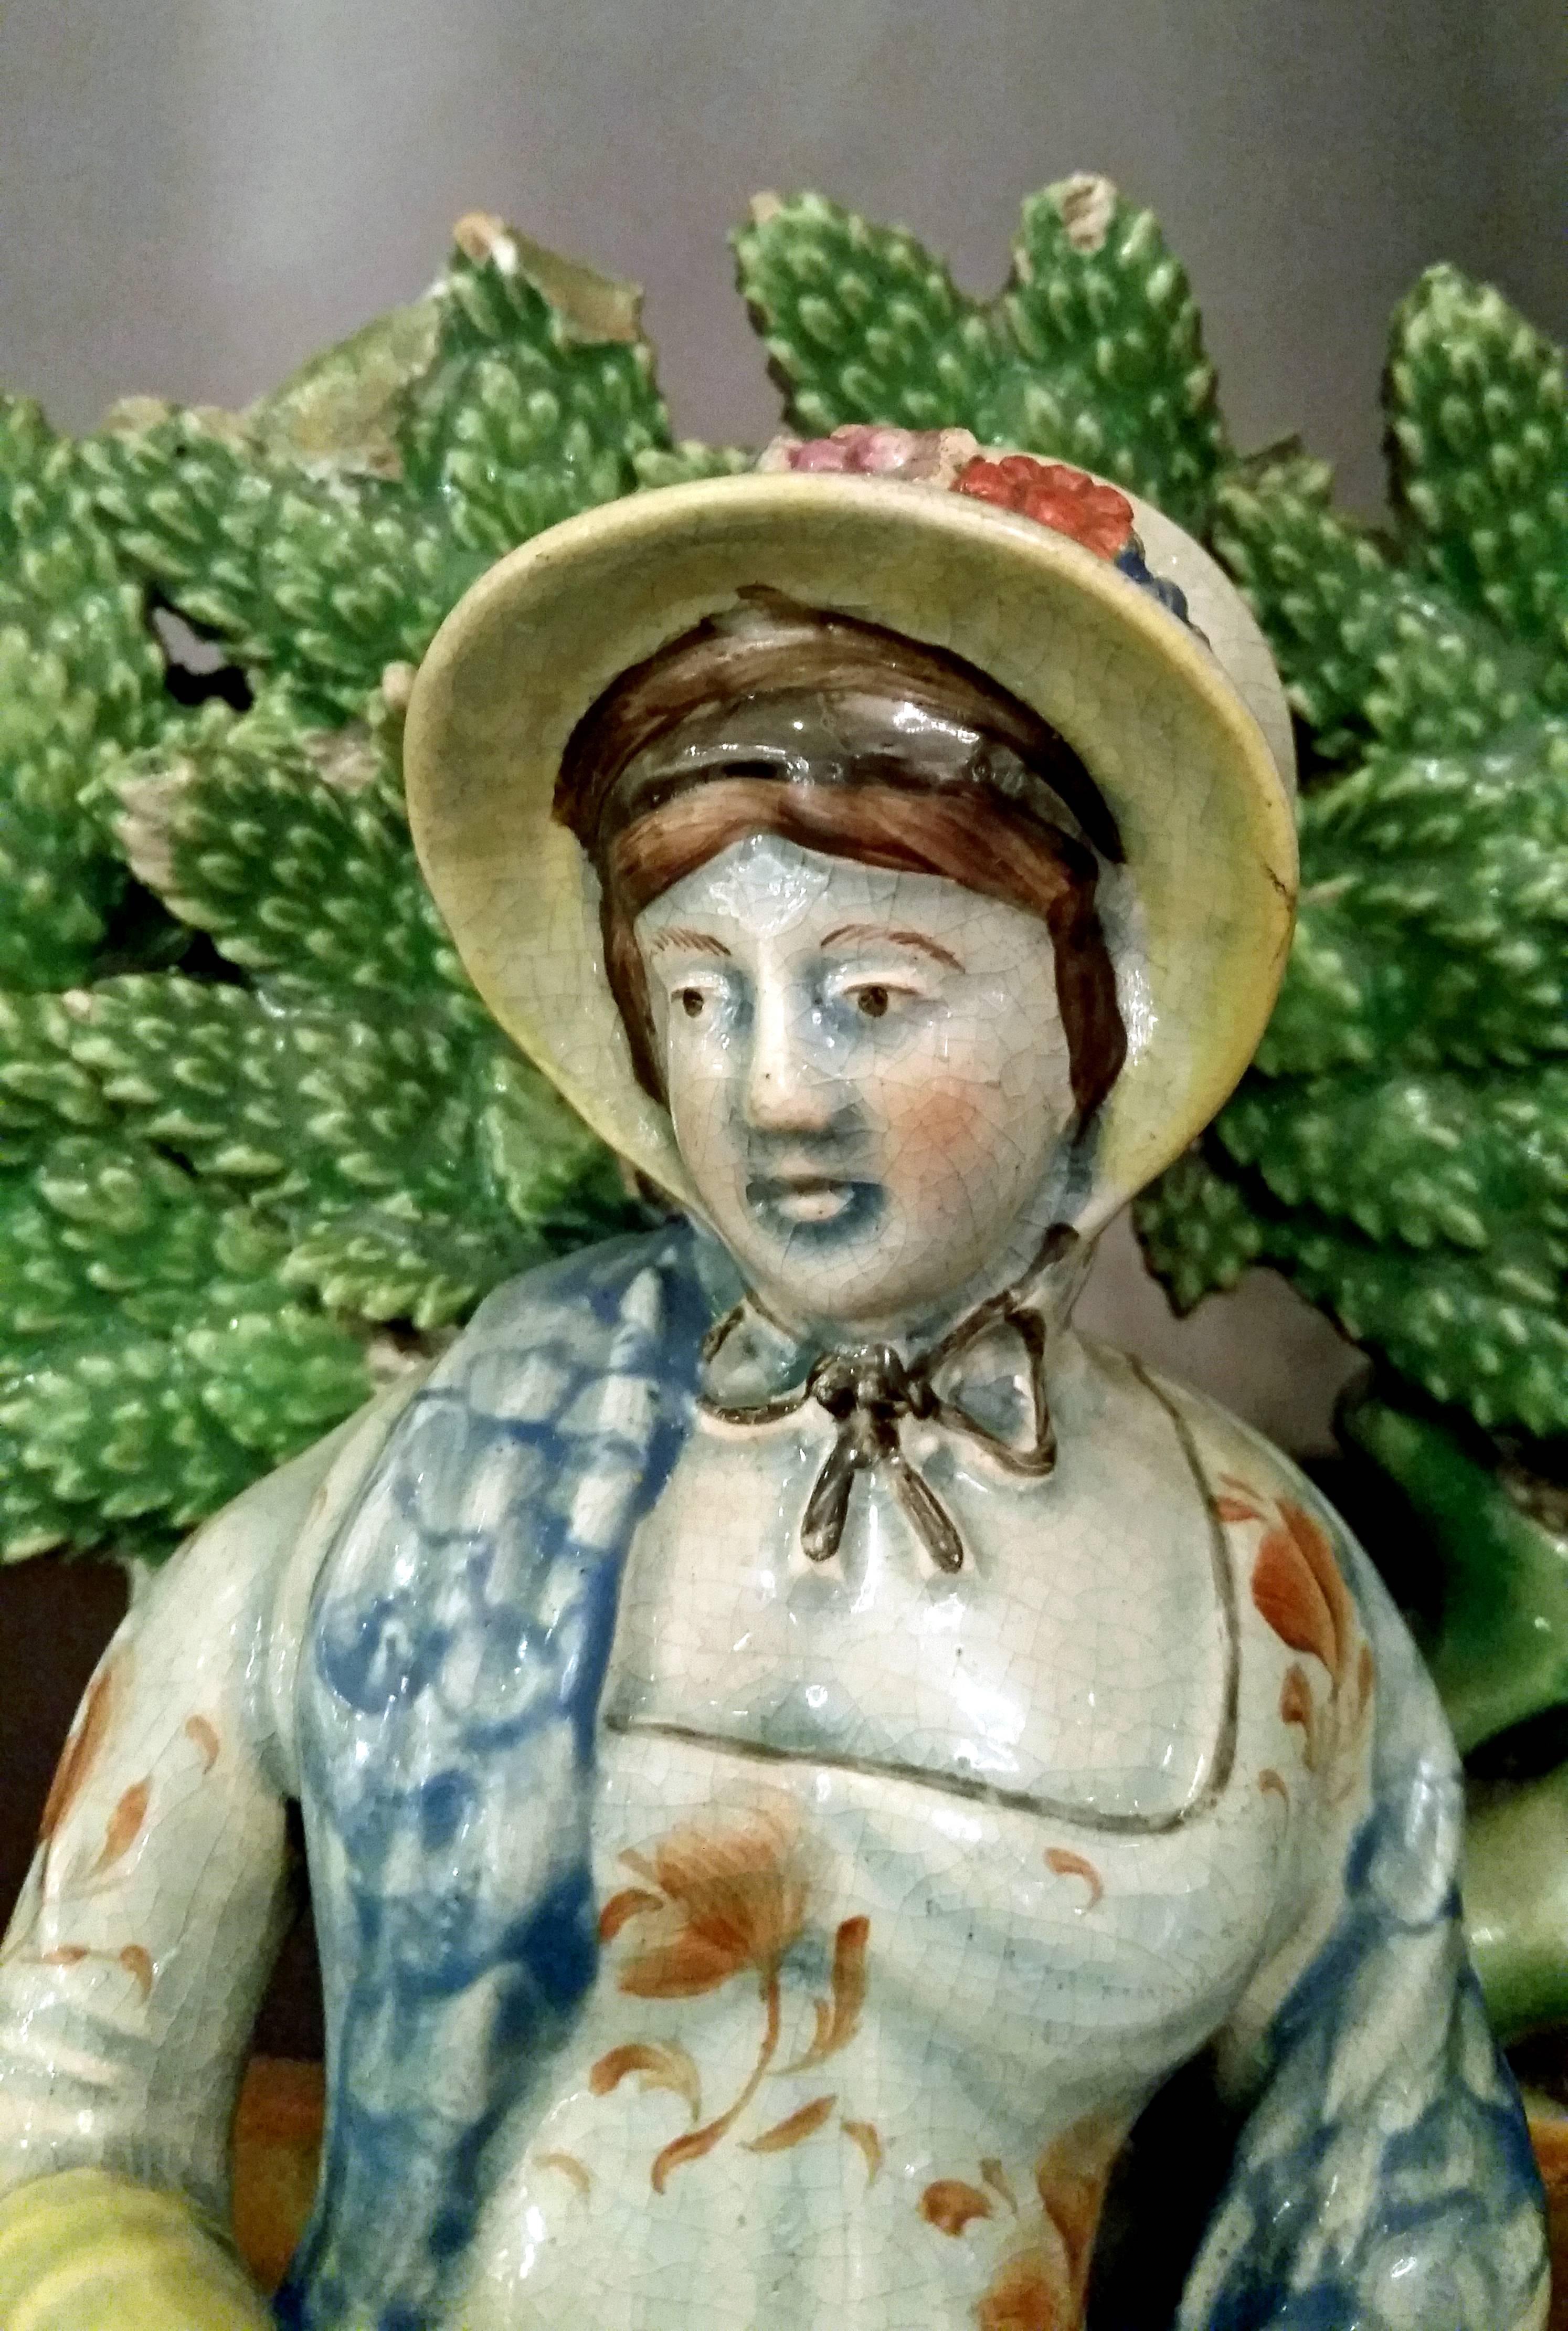 Regency Staffordshire Pottery Figure Group Persuasion by the Patriotic Group Pot Maker.